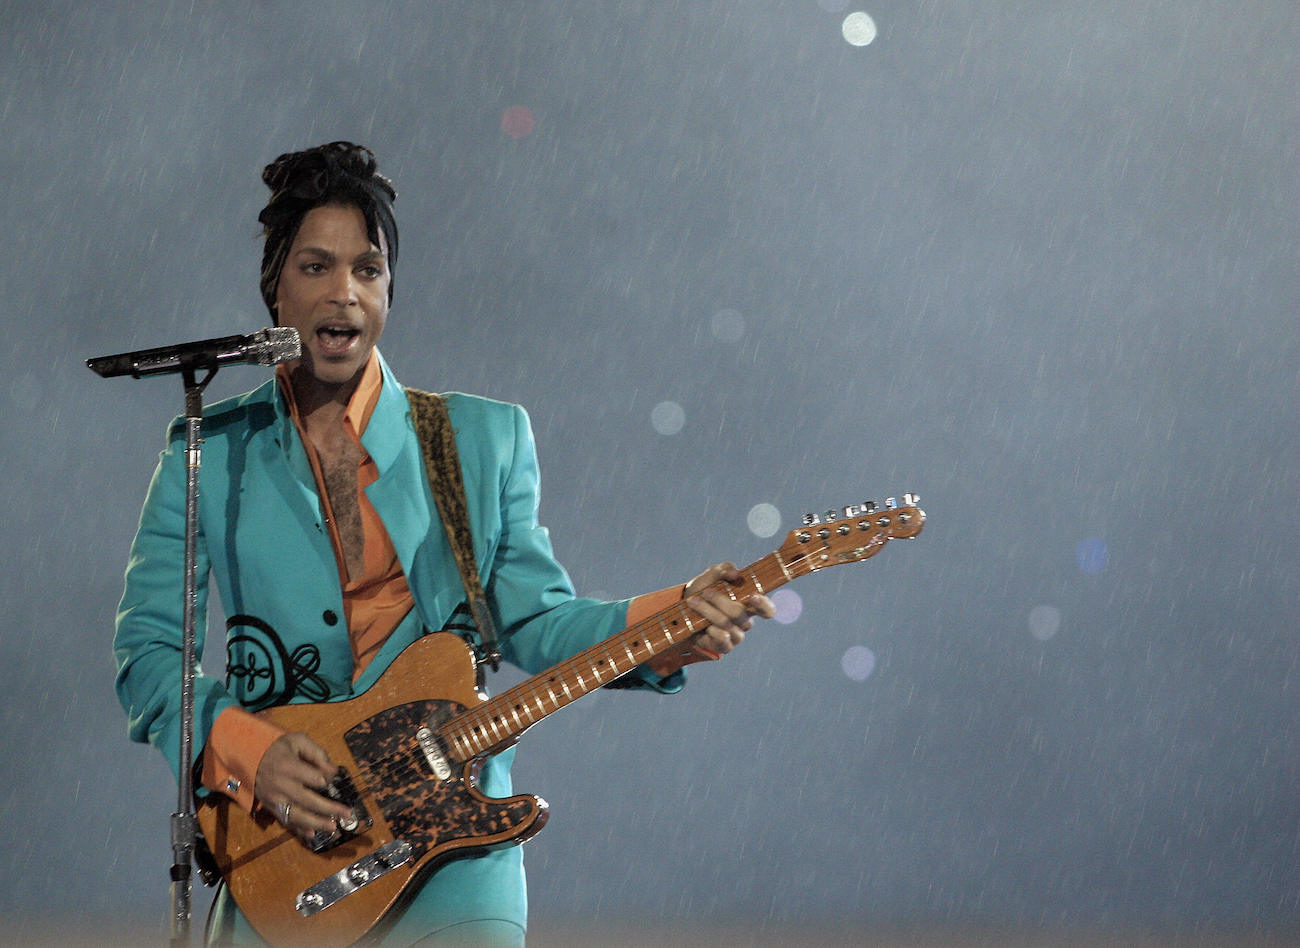 Prince plays guitar in a blue outfit at the 2007 Super Bowl halftime show